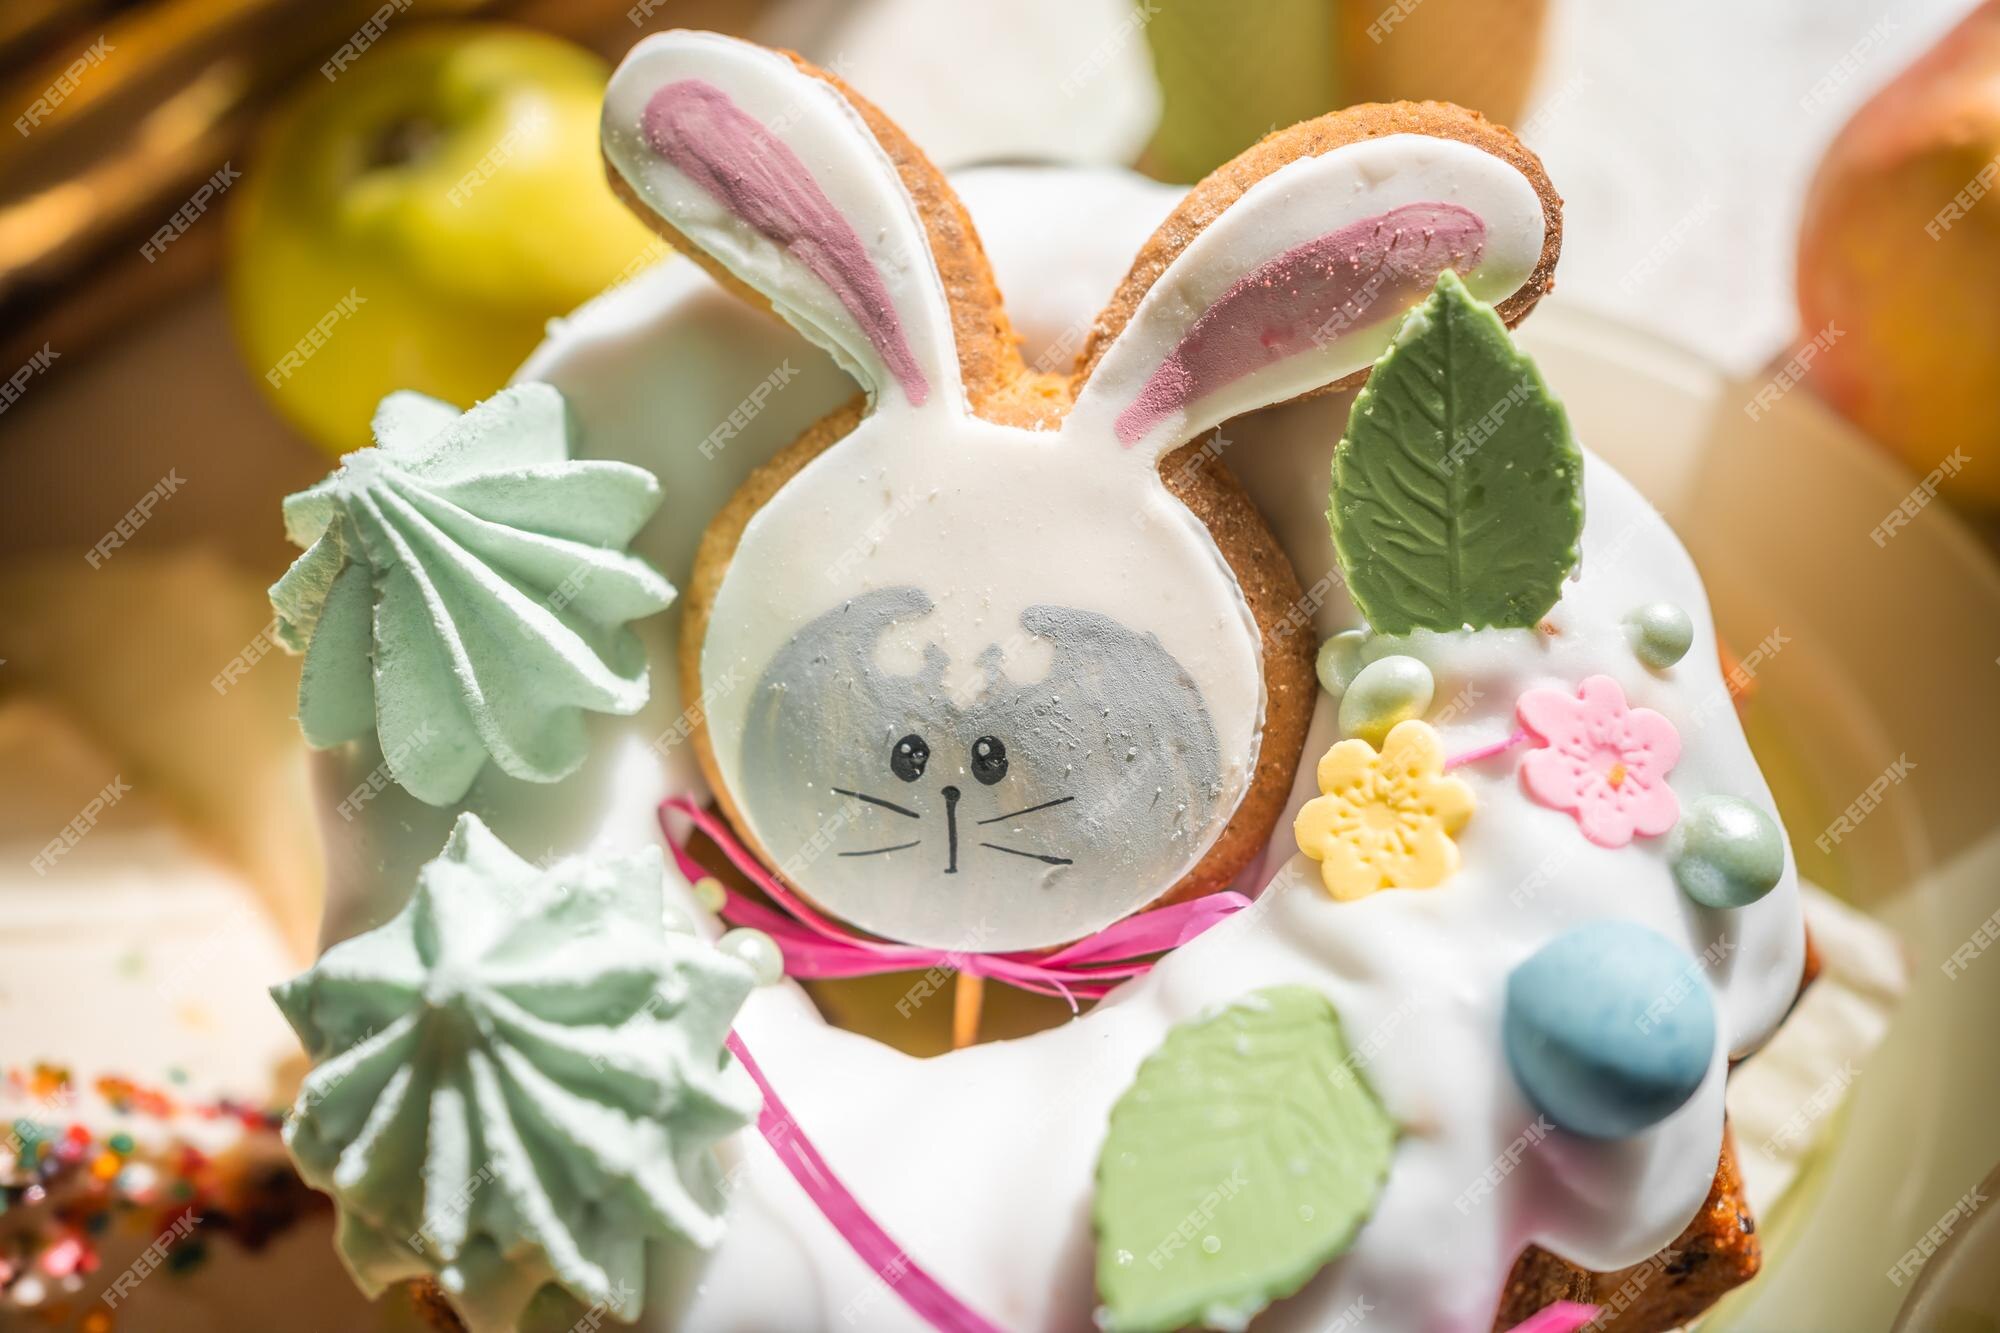 Premium Photo | Easter cake decorated gingerbread in the form of a ...